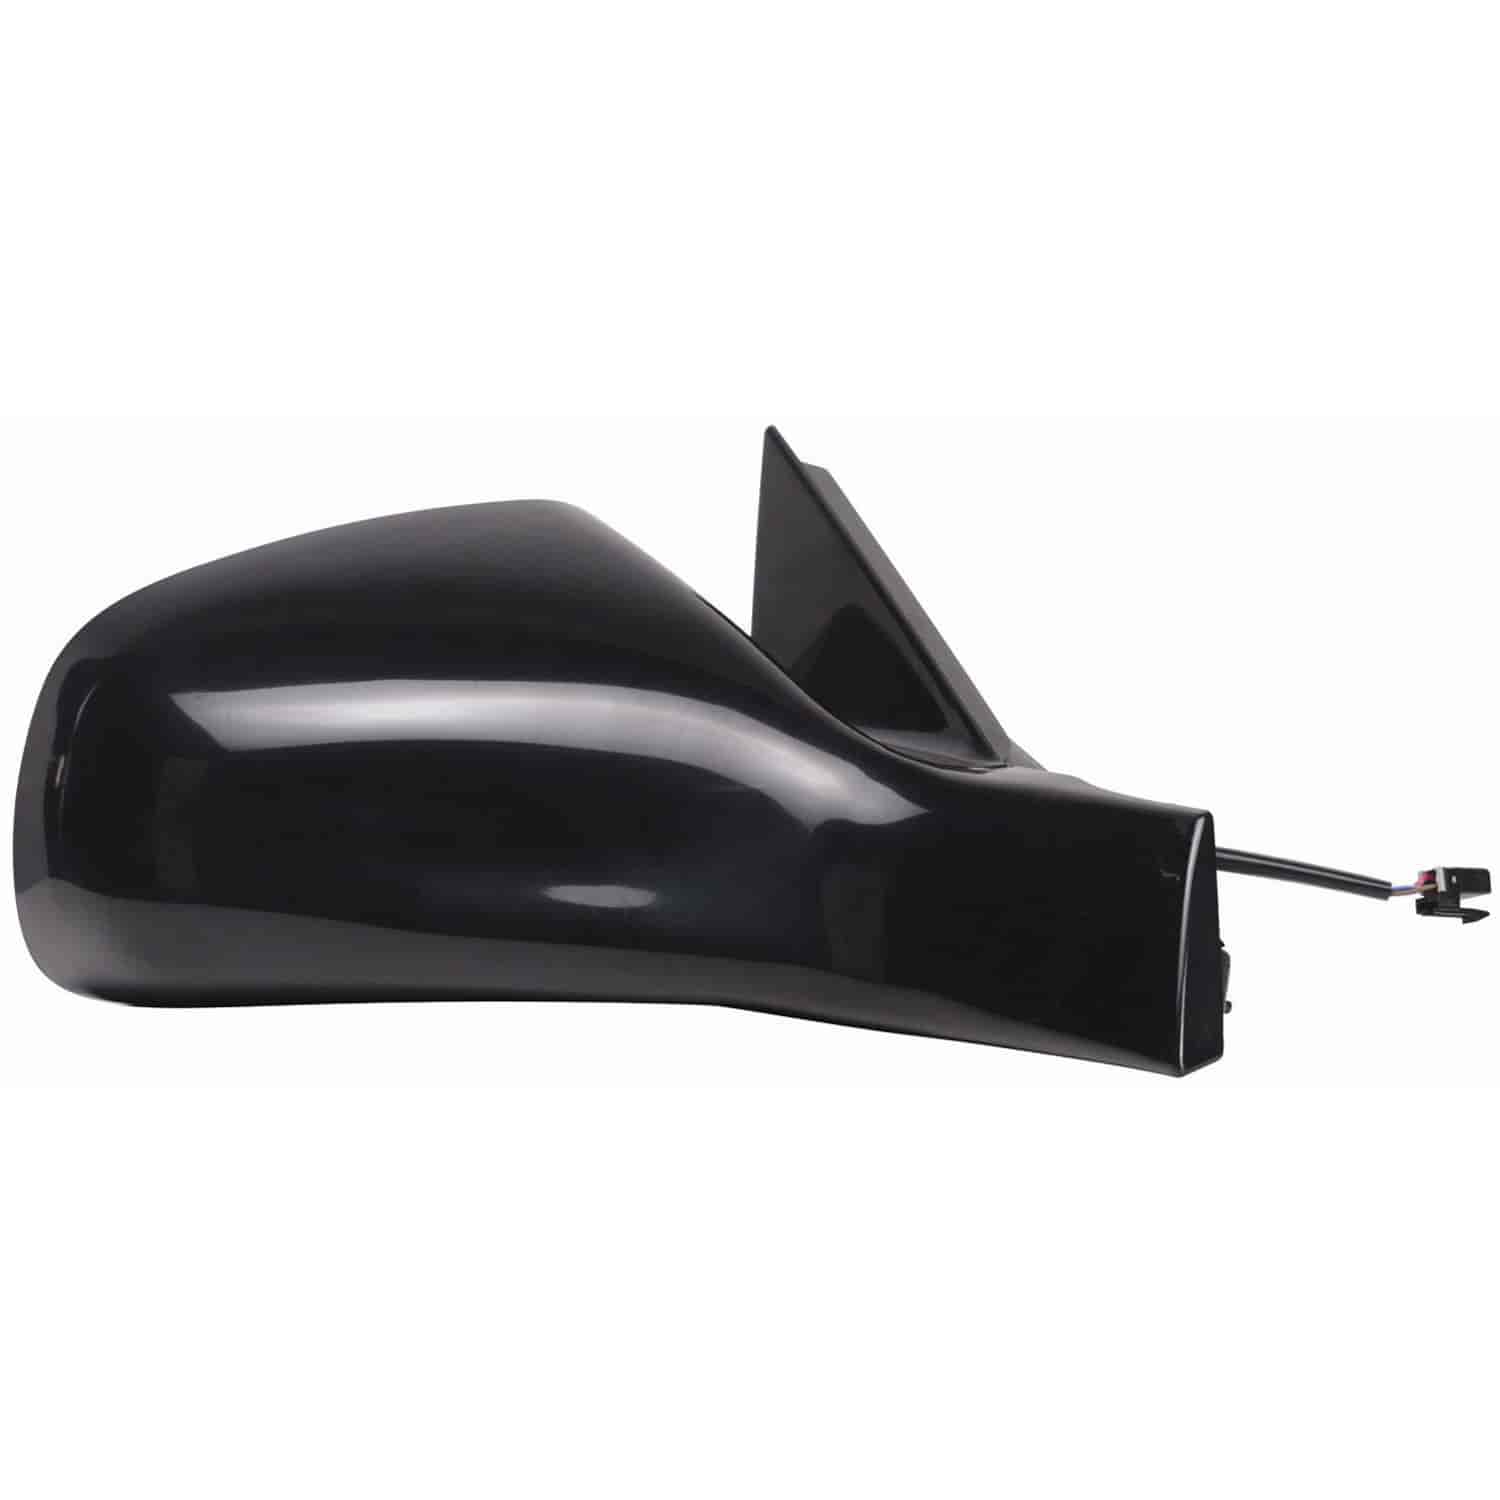 OEM Style Replacement mirror for 04-08 Pontiac Grand Prix passenger side mirror tested to fit and fu